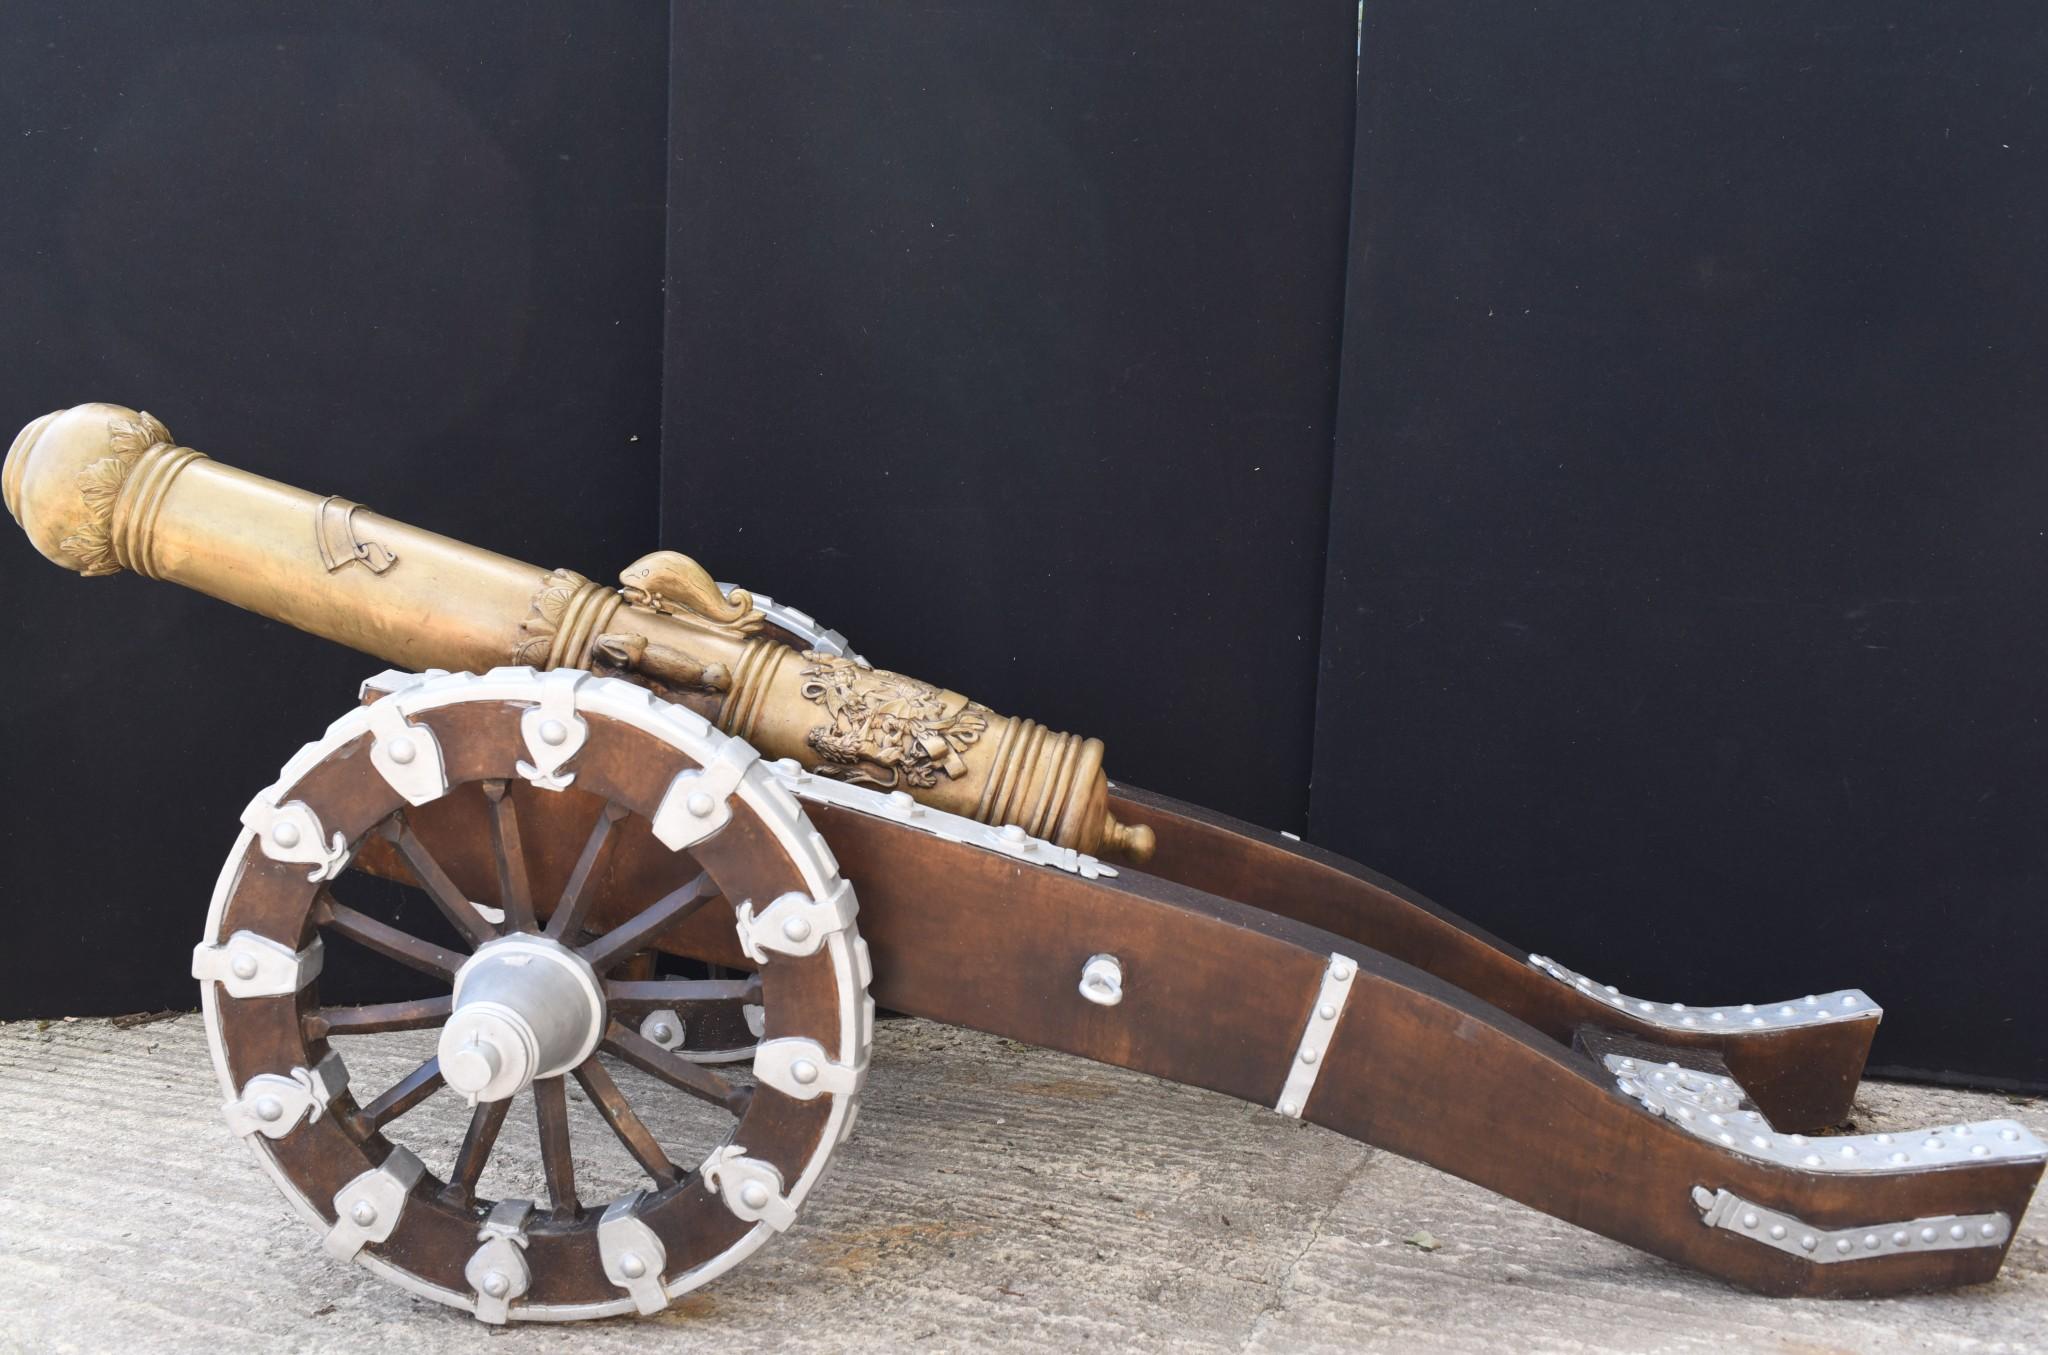 Impressive pair of large French bronze cannons 
Great for a garden or business
Of course being bronze these can live outside with no fear of rusting
Viewings available by appointment
Offered in great shape ready for home use right away.

